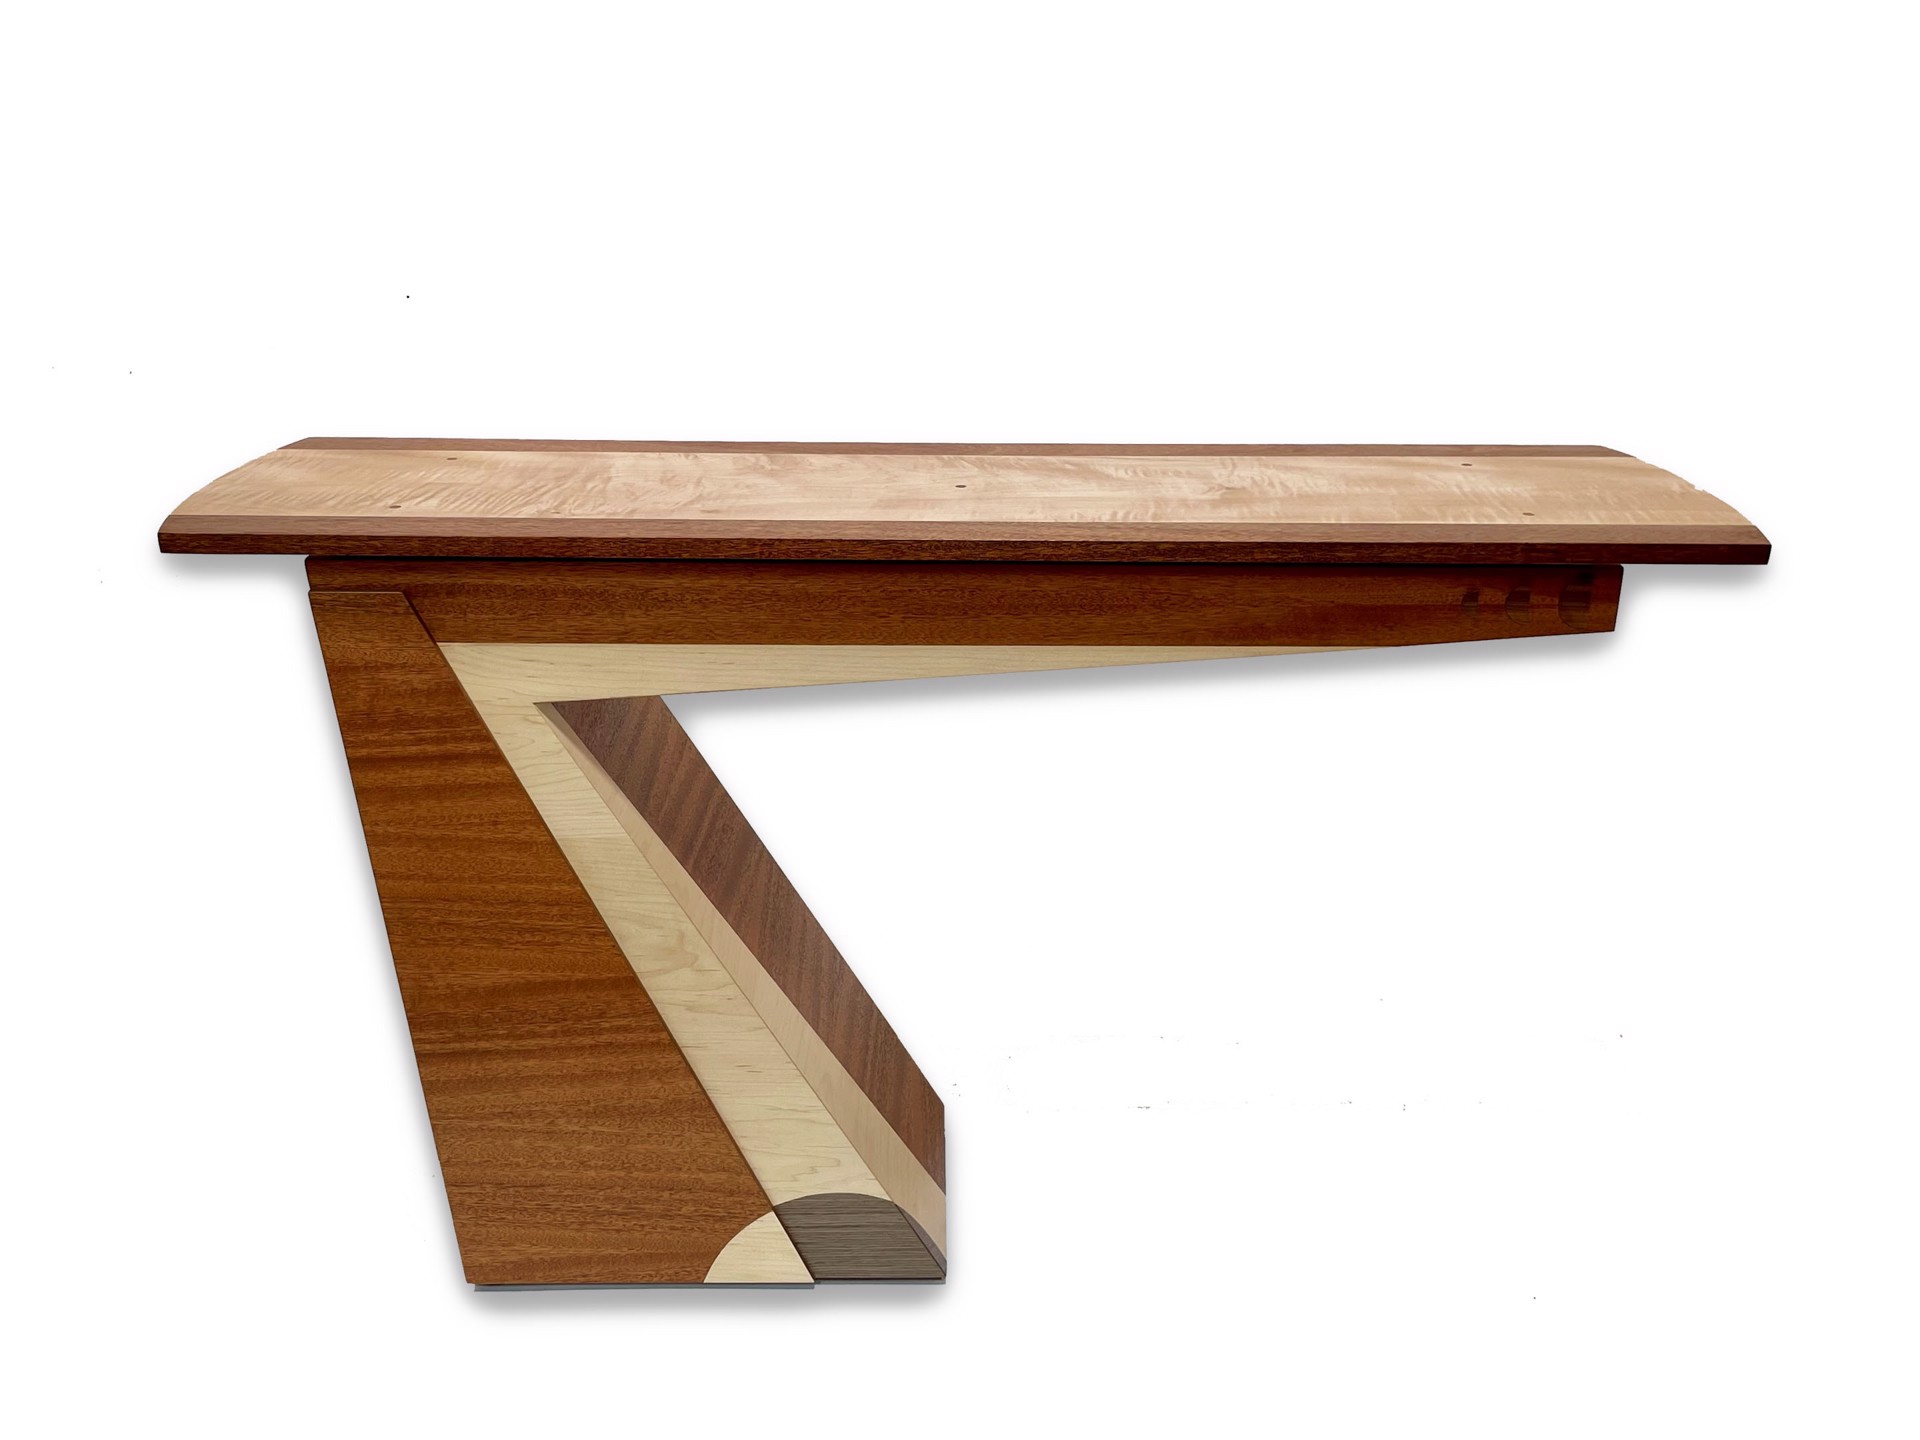 Curly Maple Floating Table ~ African Mahogany, Walnut, Curly Maple Solid Top & Veneers  by Joseph Nikrasch